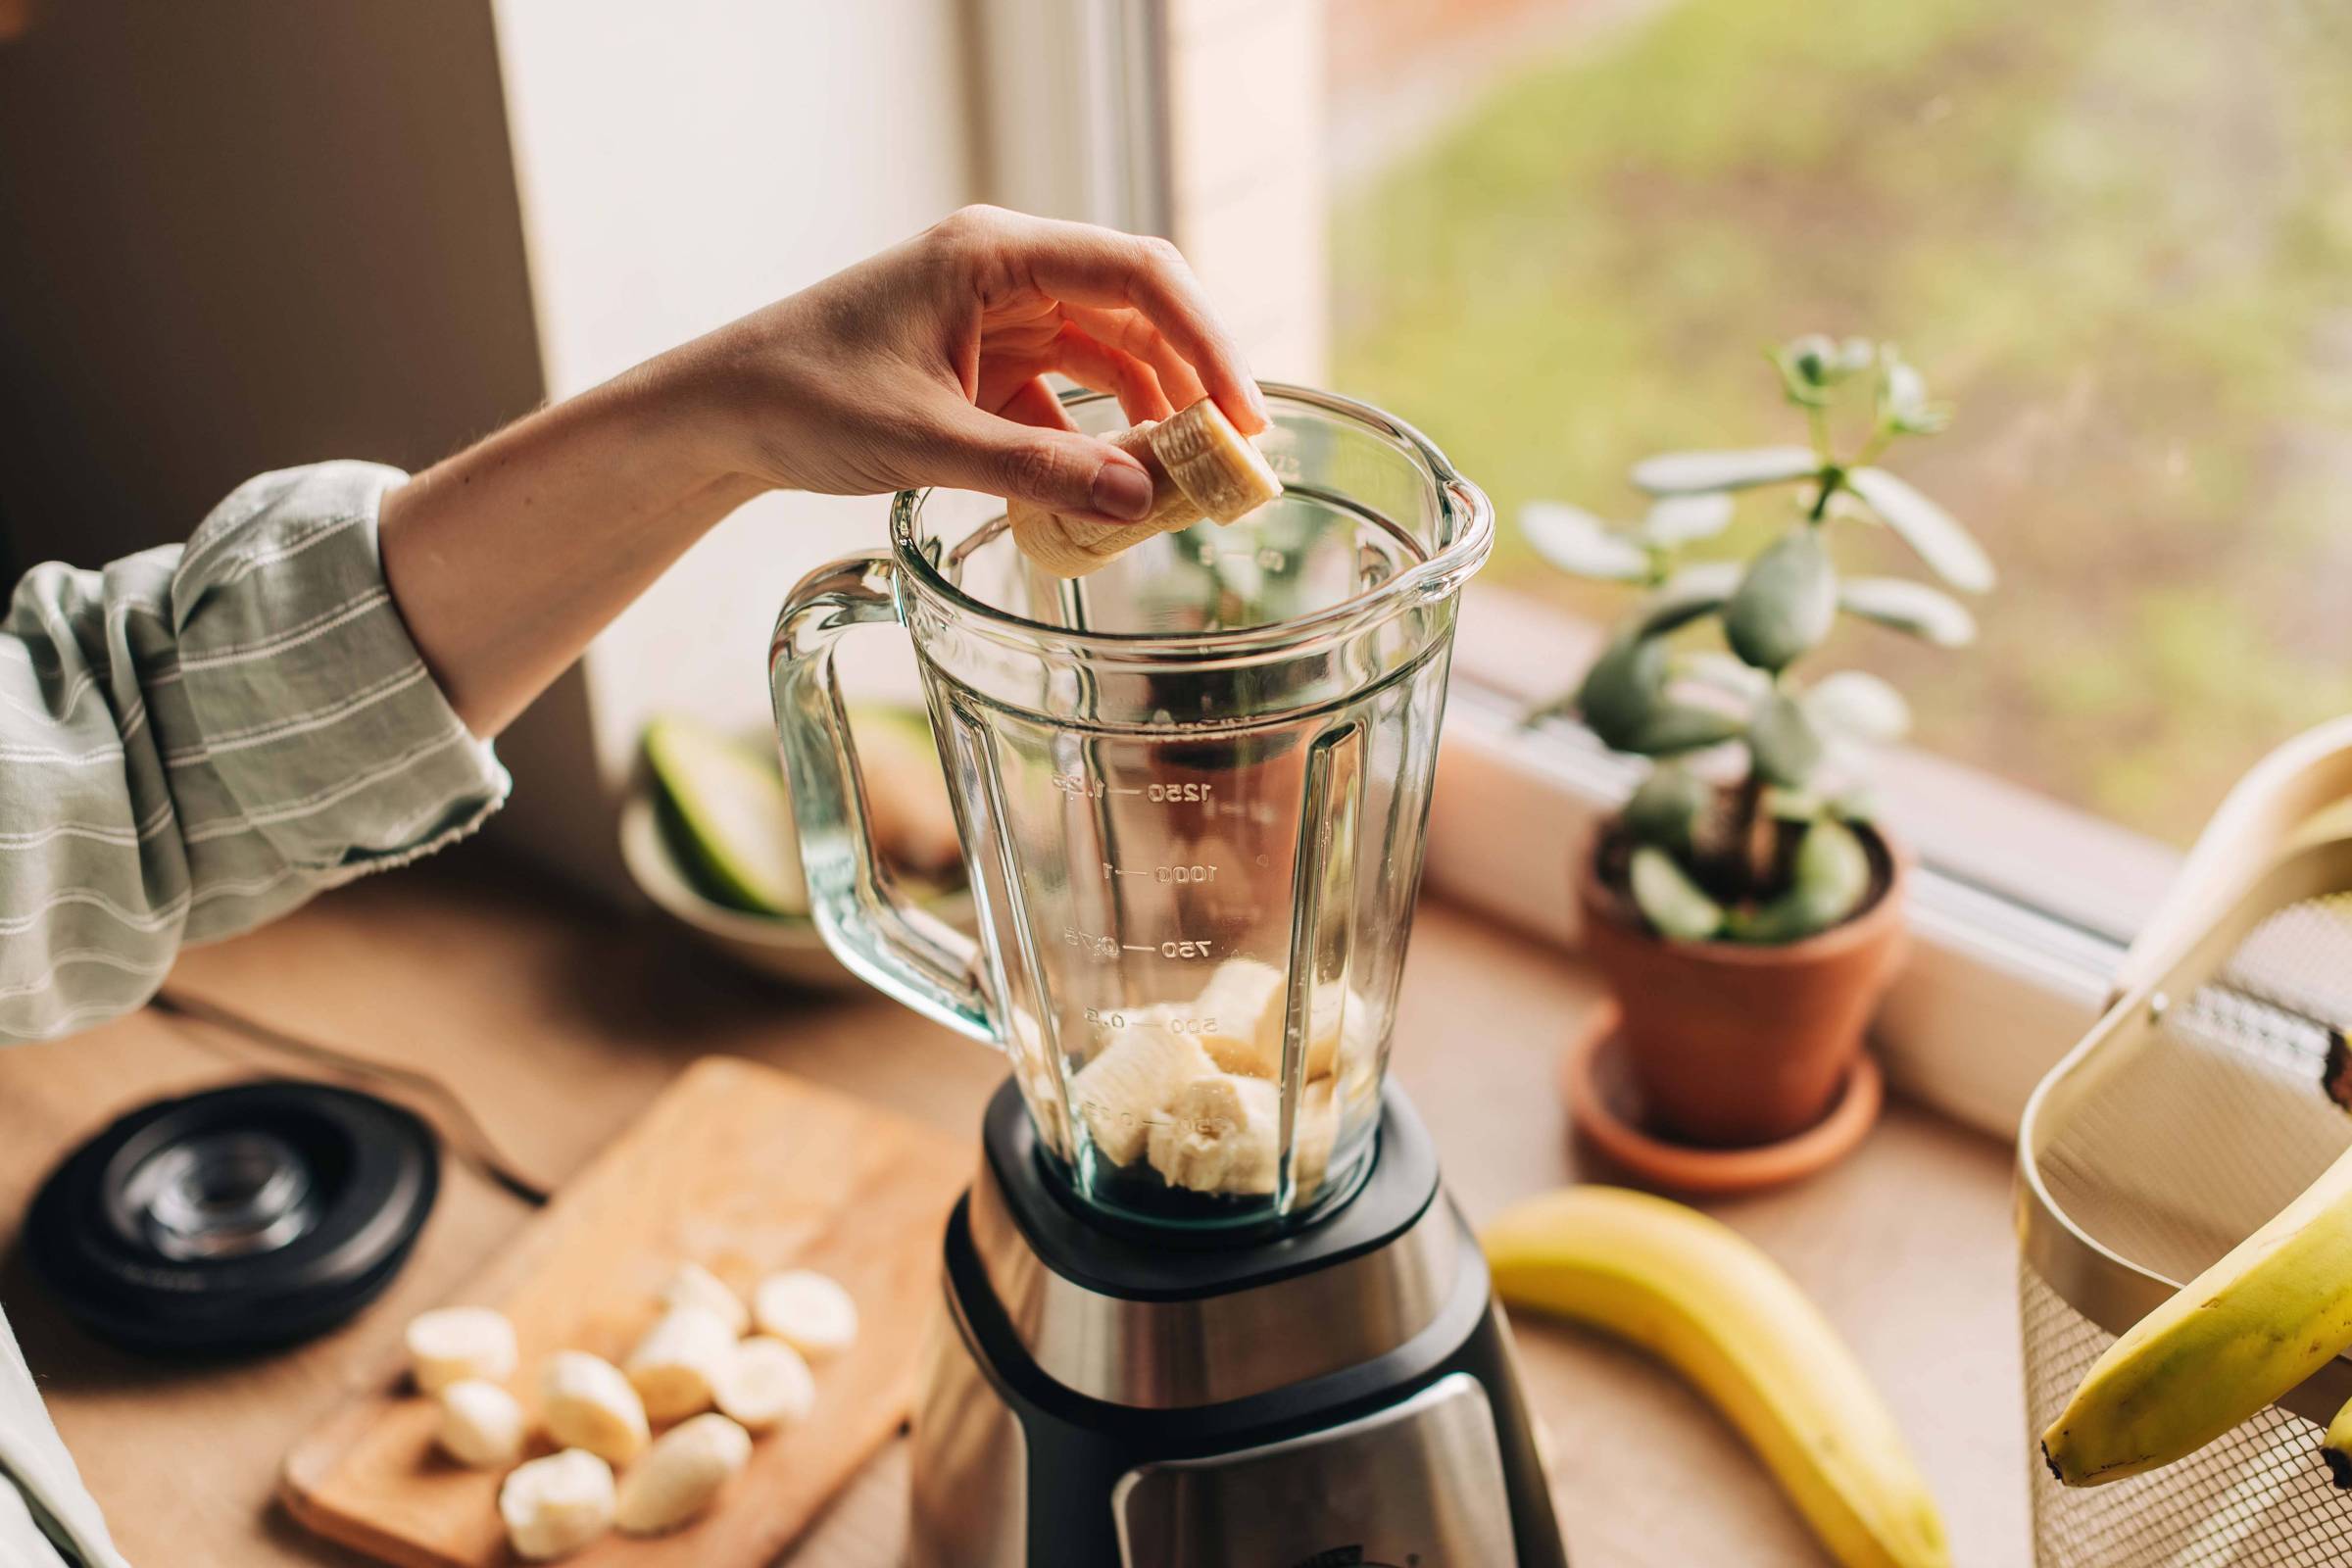 Fruits in a blender do not lose nutrients, but can be less filling